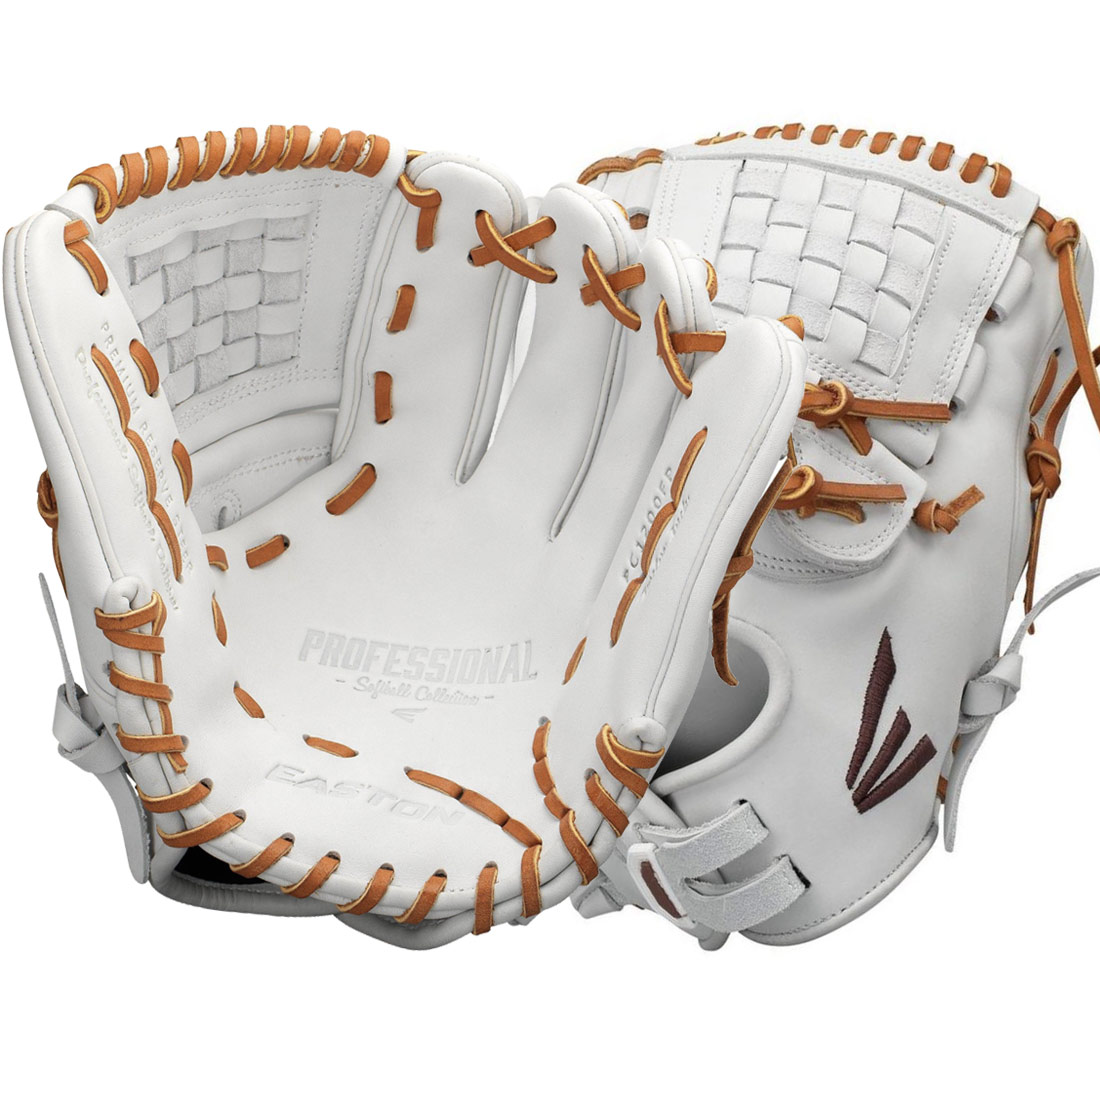 Easton Pro Collection Fastpitch Softball Glove 12\" PC1201FP